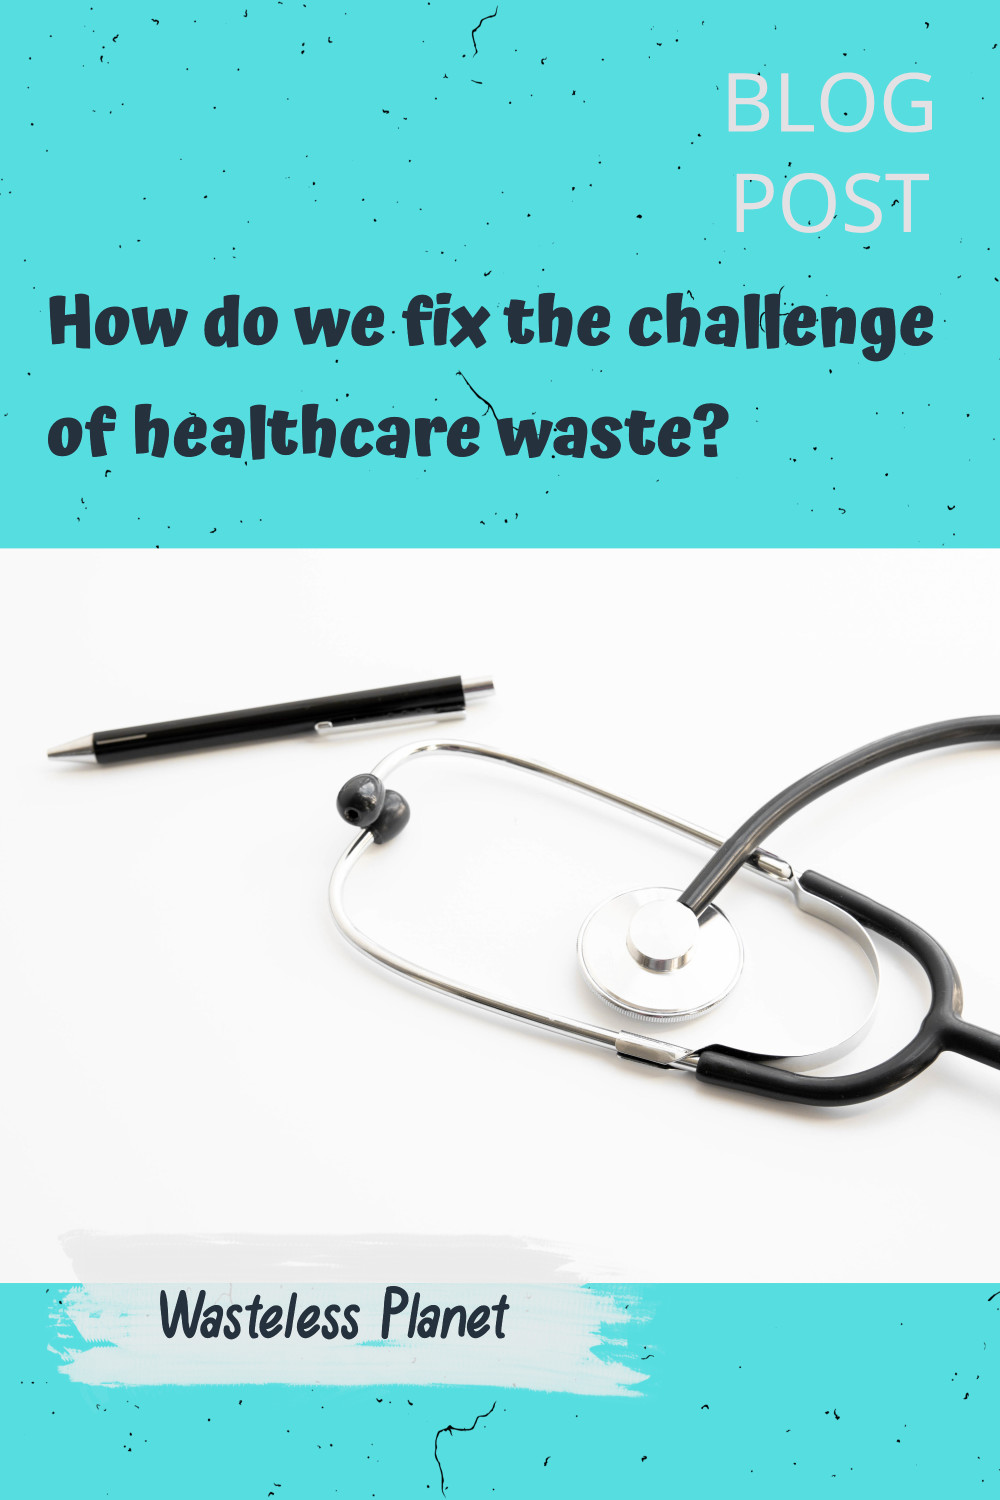 How do we fix the challenge of healthcare waste?